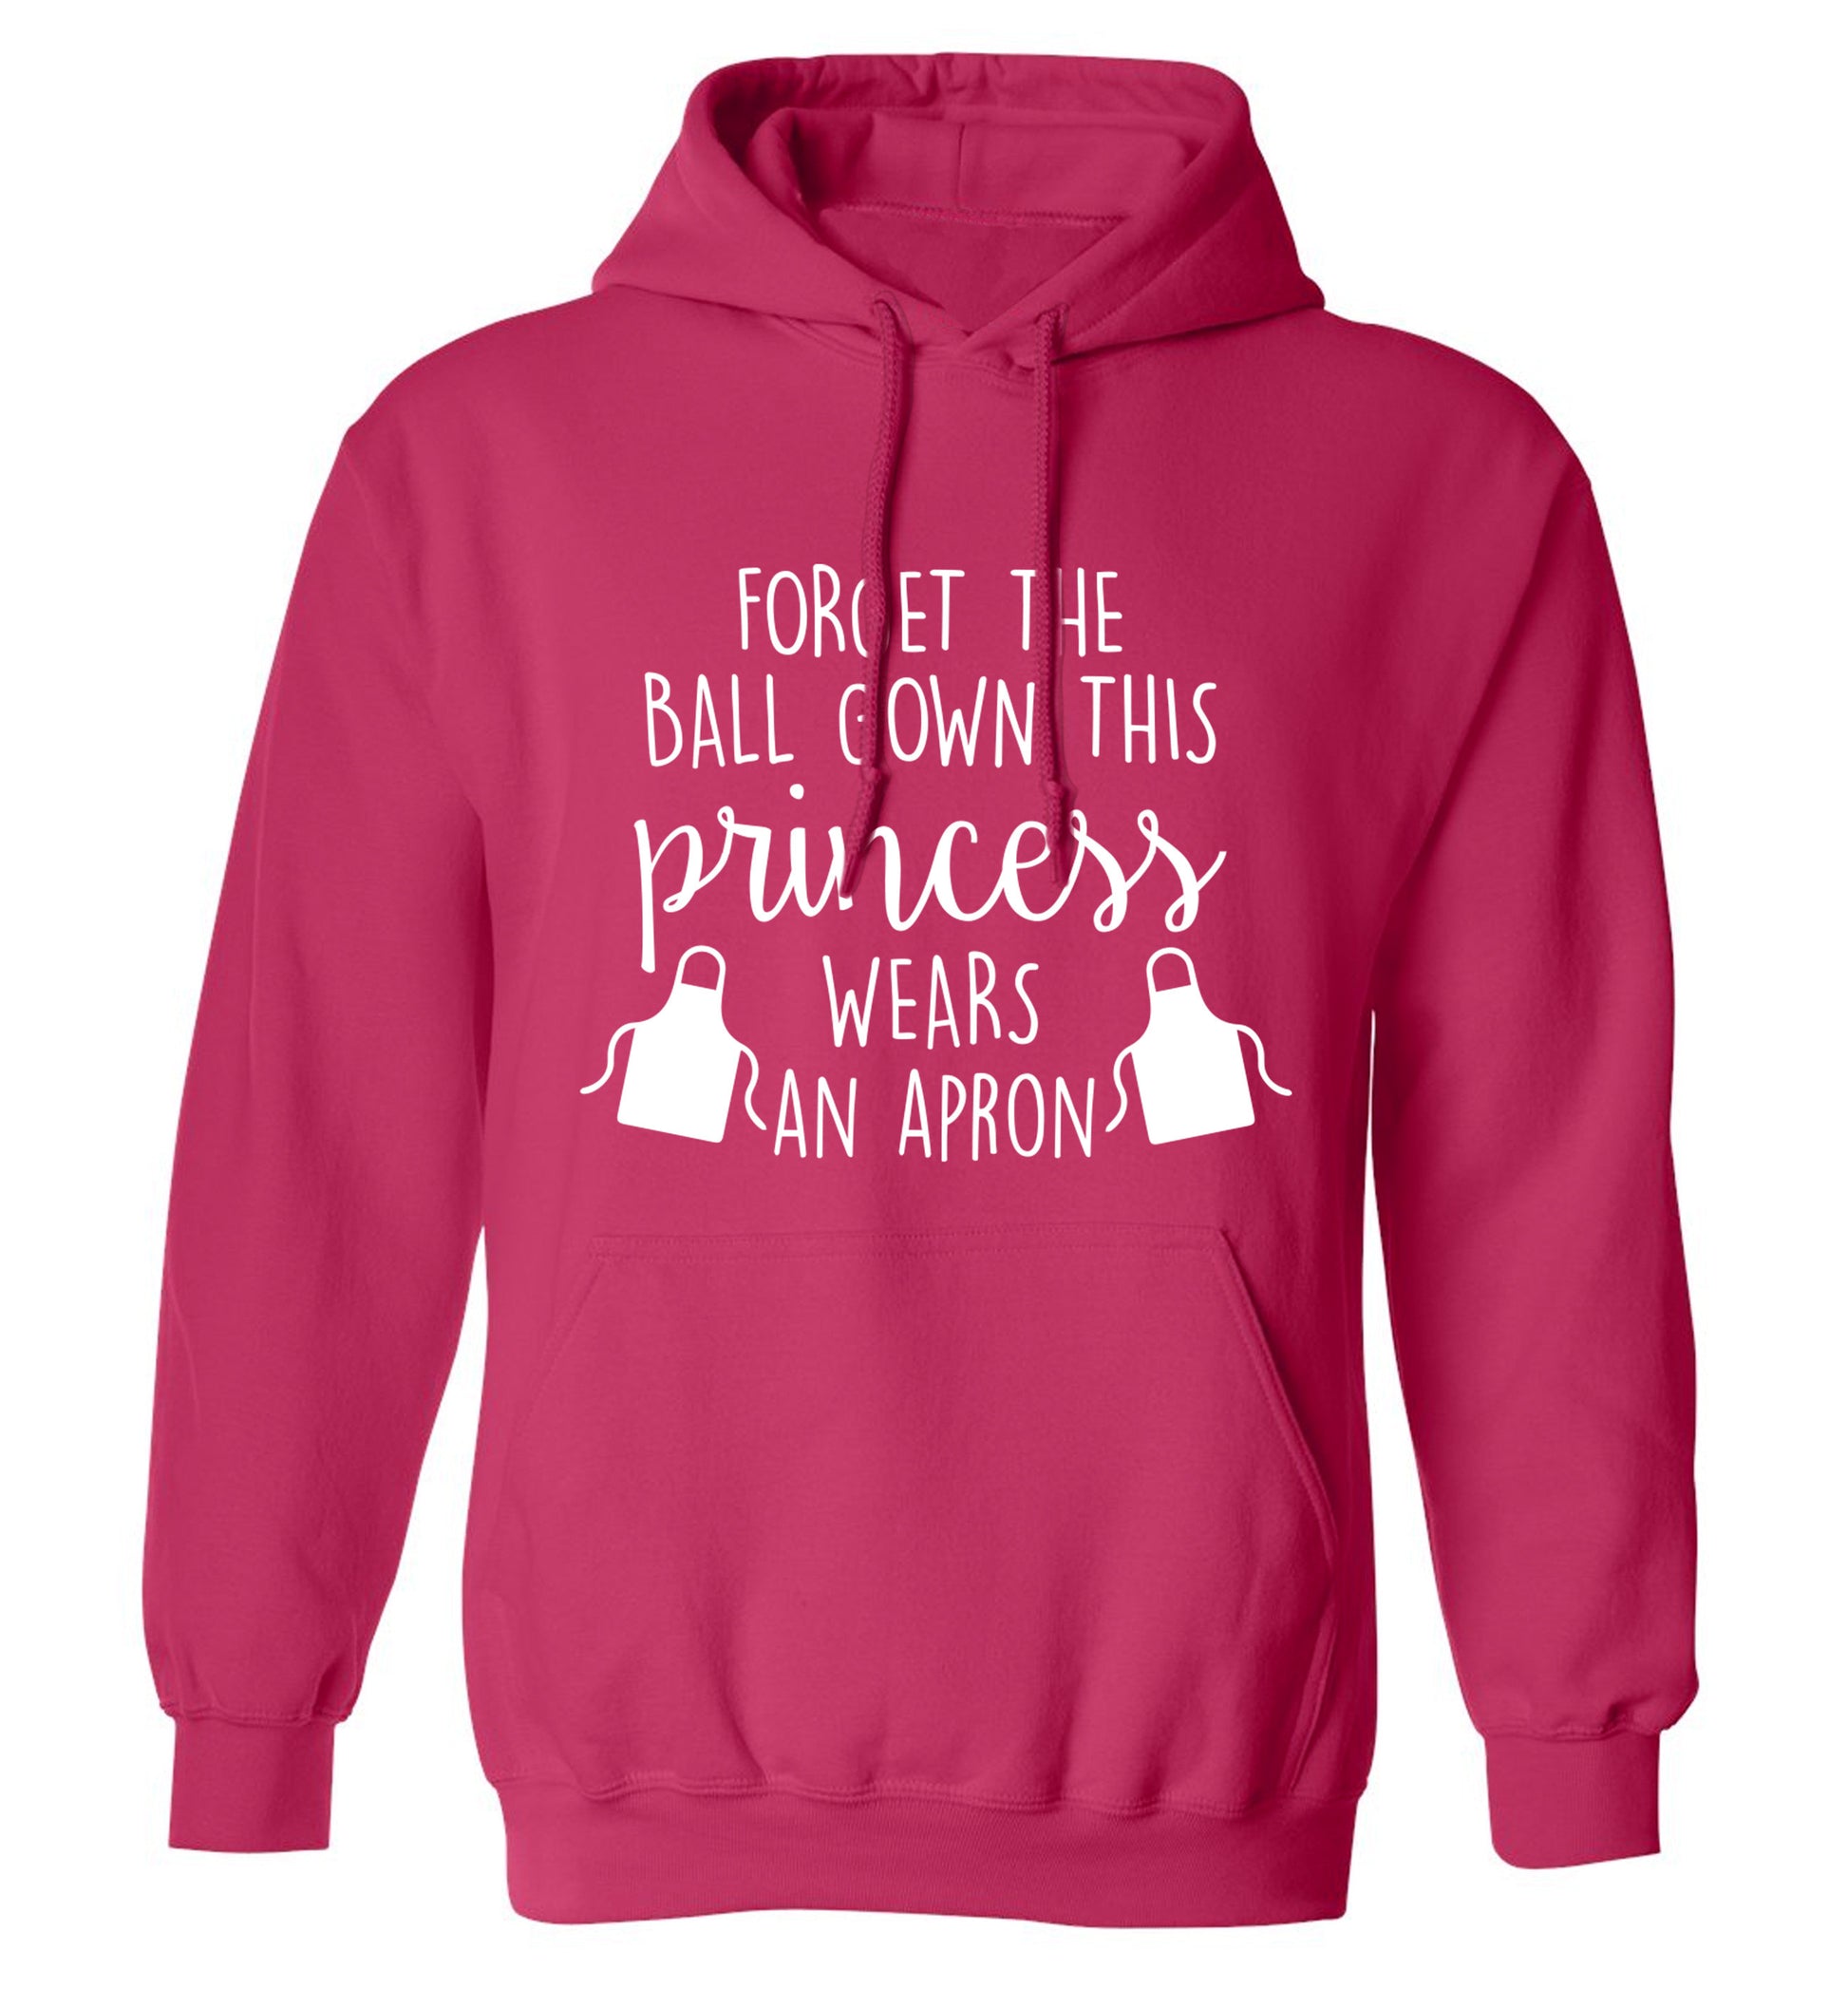 Forget the ball gown this princess wears an apron adults unisex pink hoodie 2XL